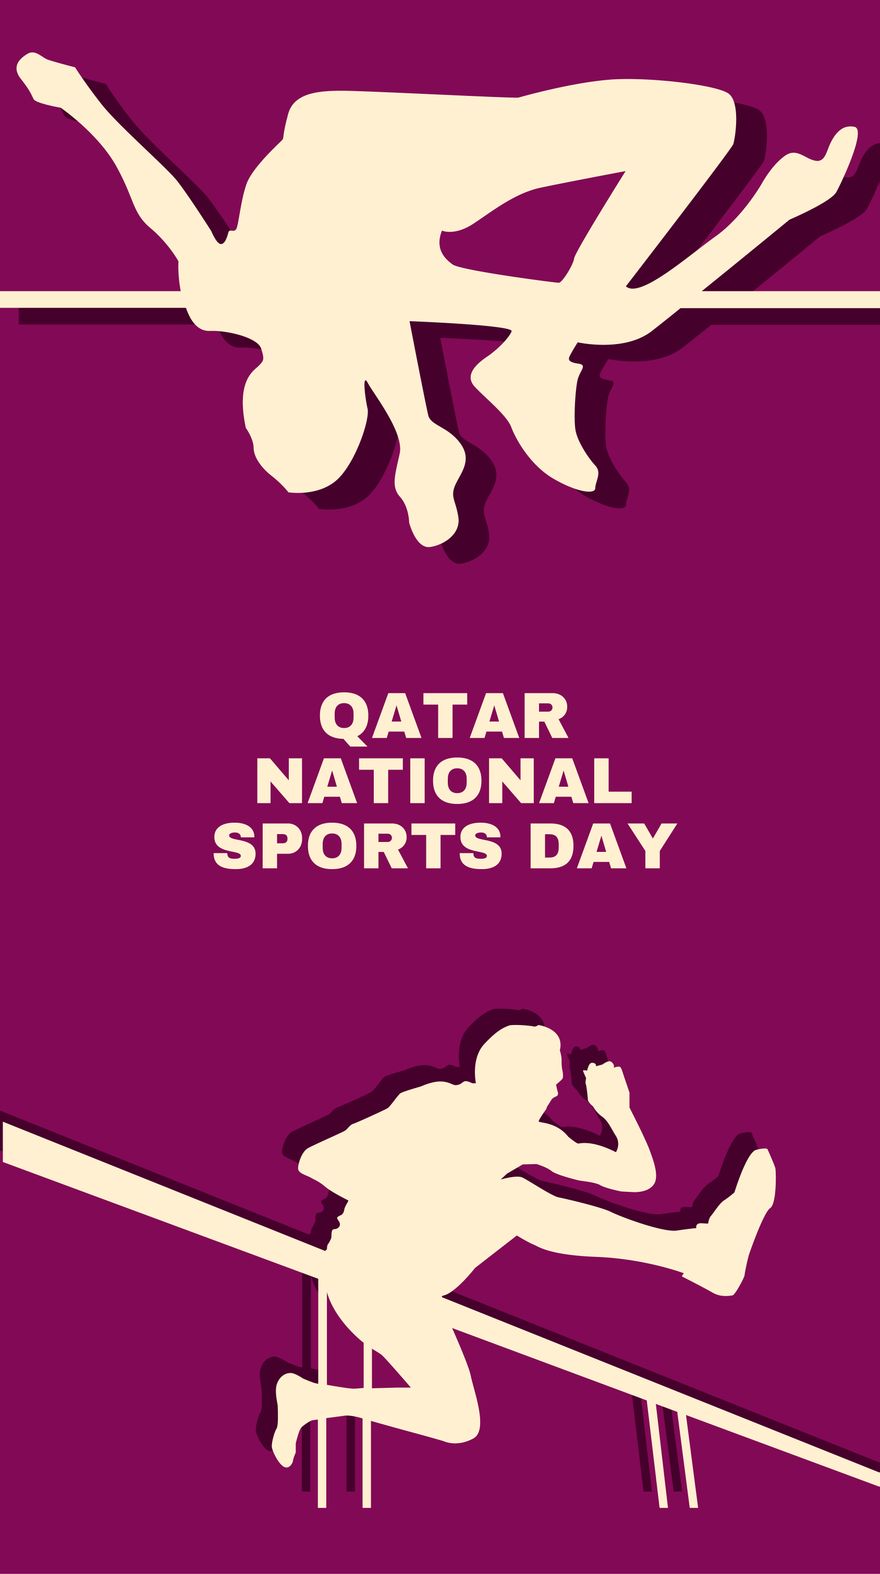 Free Qatar National Sports Day iPhone Background in PDF, Illustrator, PSD, EPS, SVG, JPG, PNG